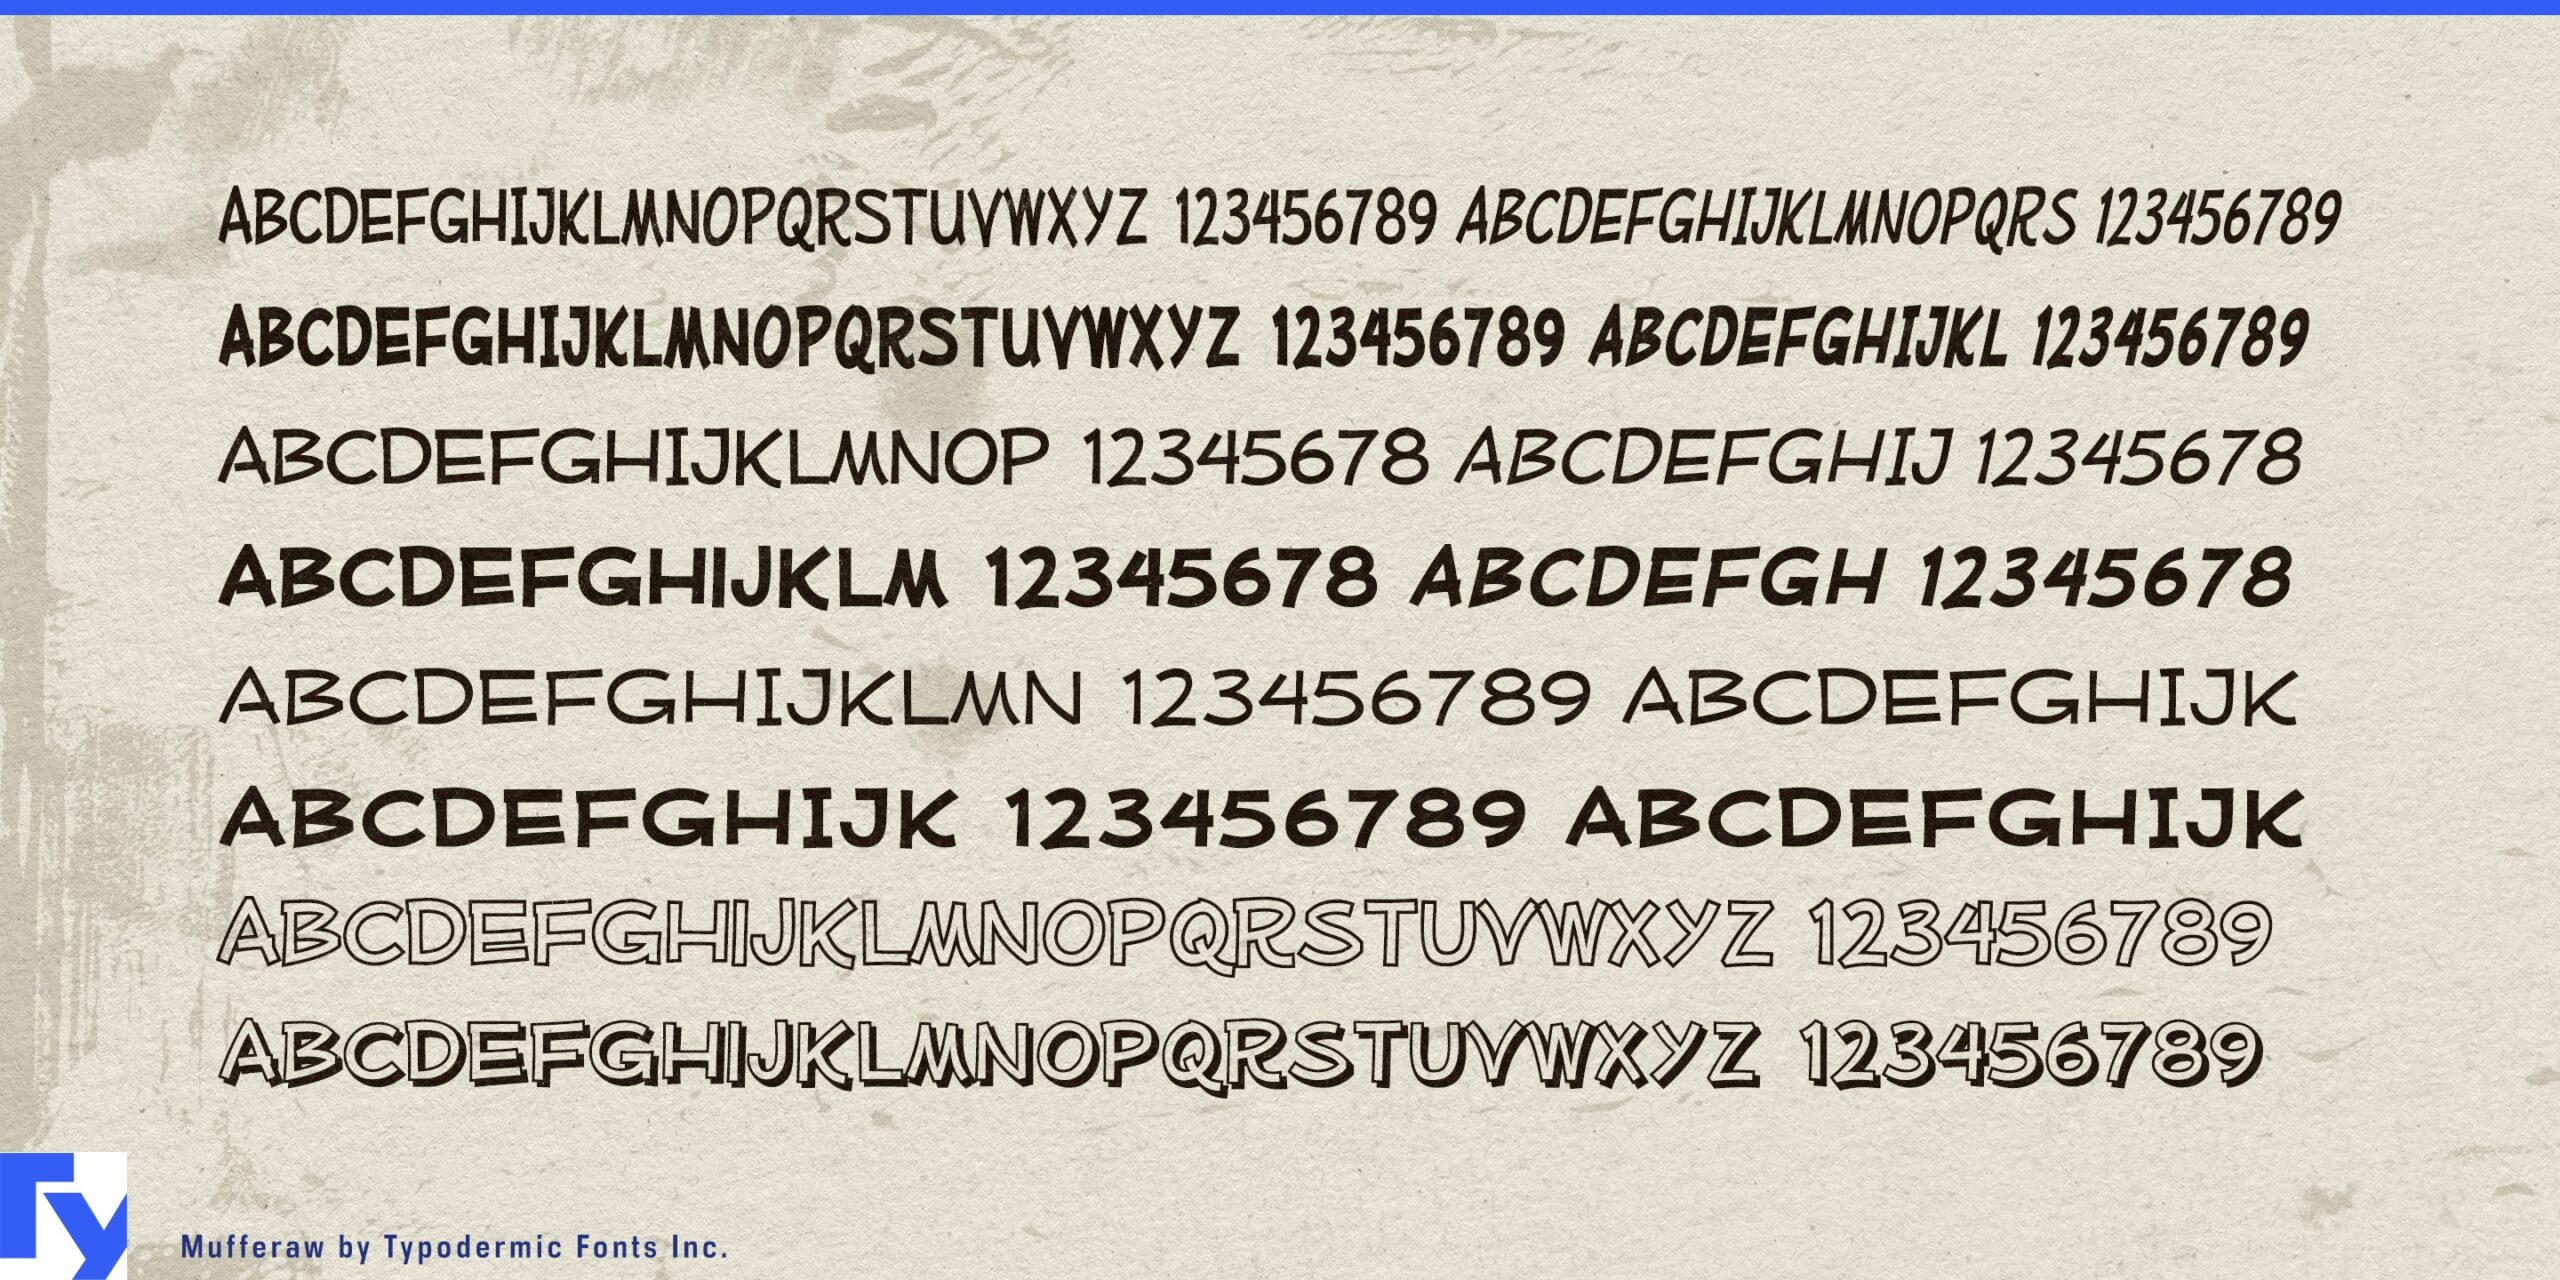 Expressive Contours of Mufferaw Typeface: Uniquely Charming